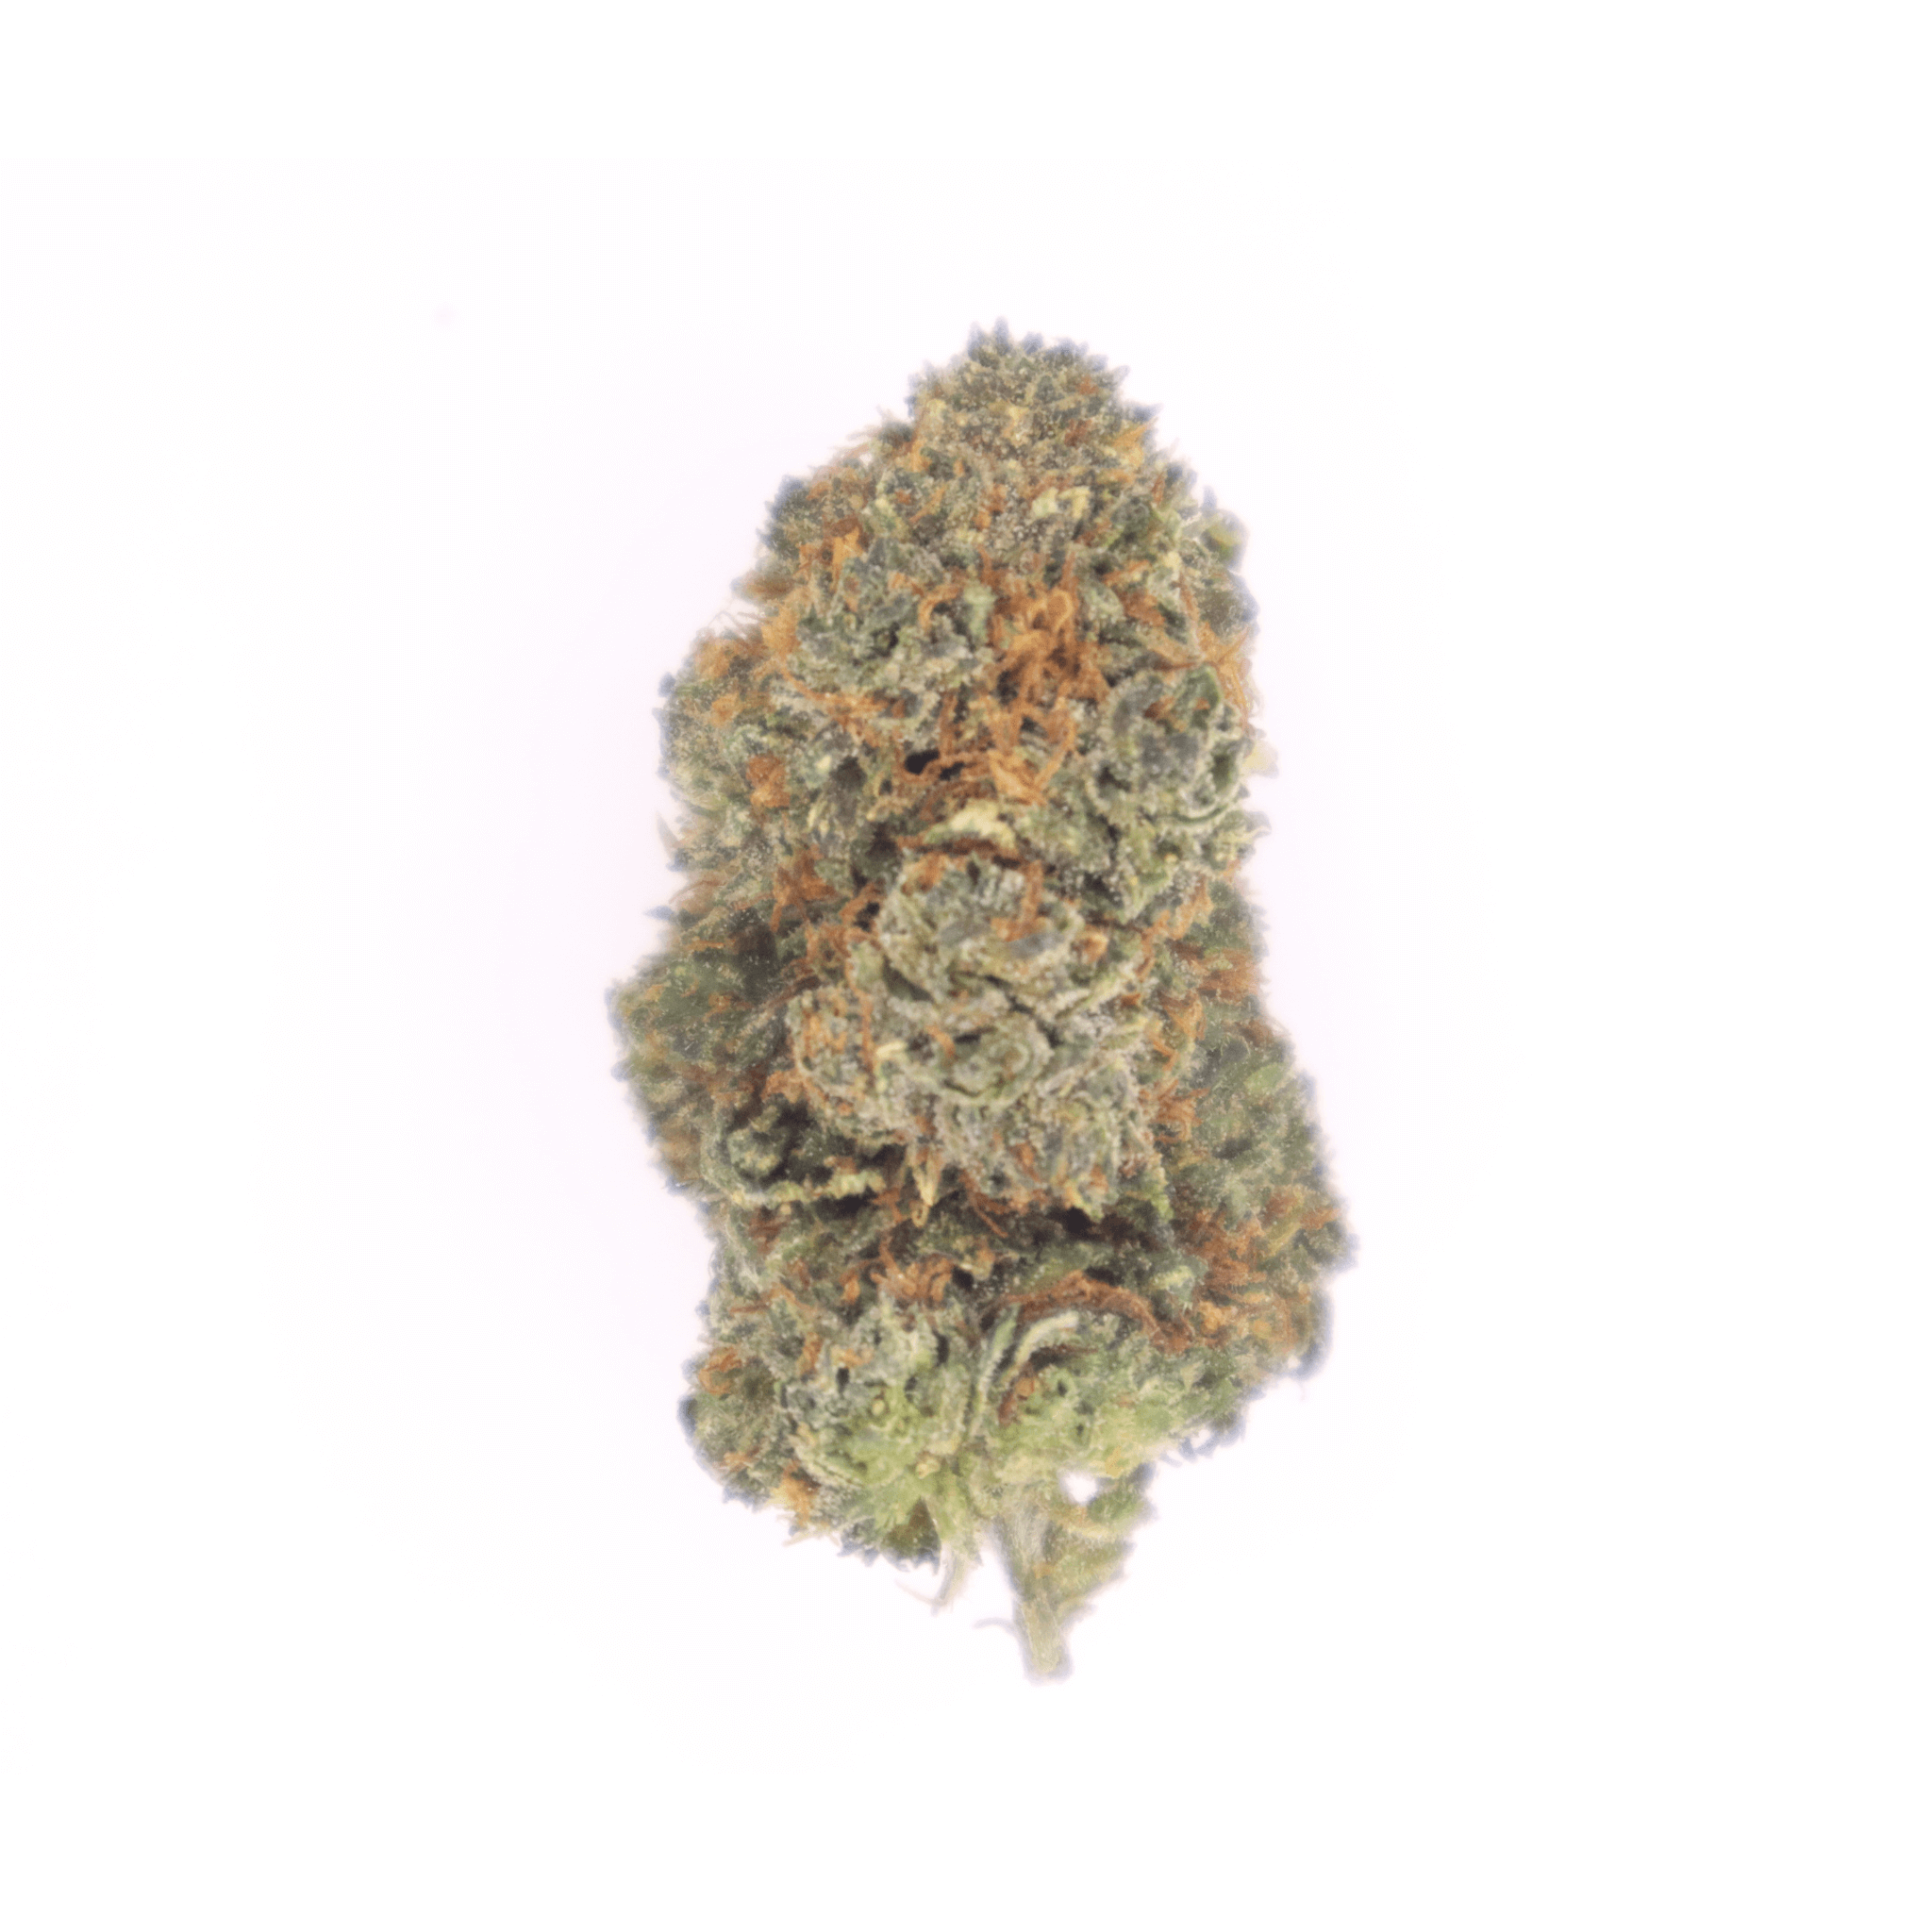 High-quality HHC flowers grown and sold in the UK. These cannabis flowers have been carefully cultivated to produce potent and flavorful buds, perfect for those looking for a premium HHC experience.